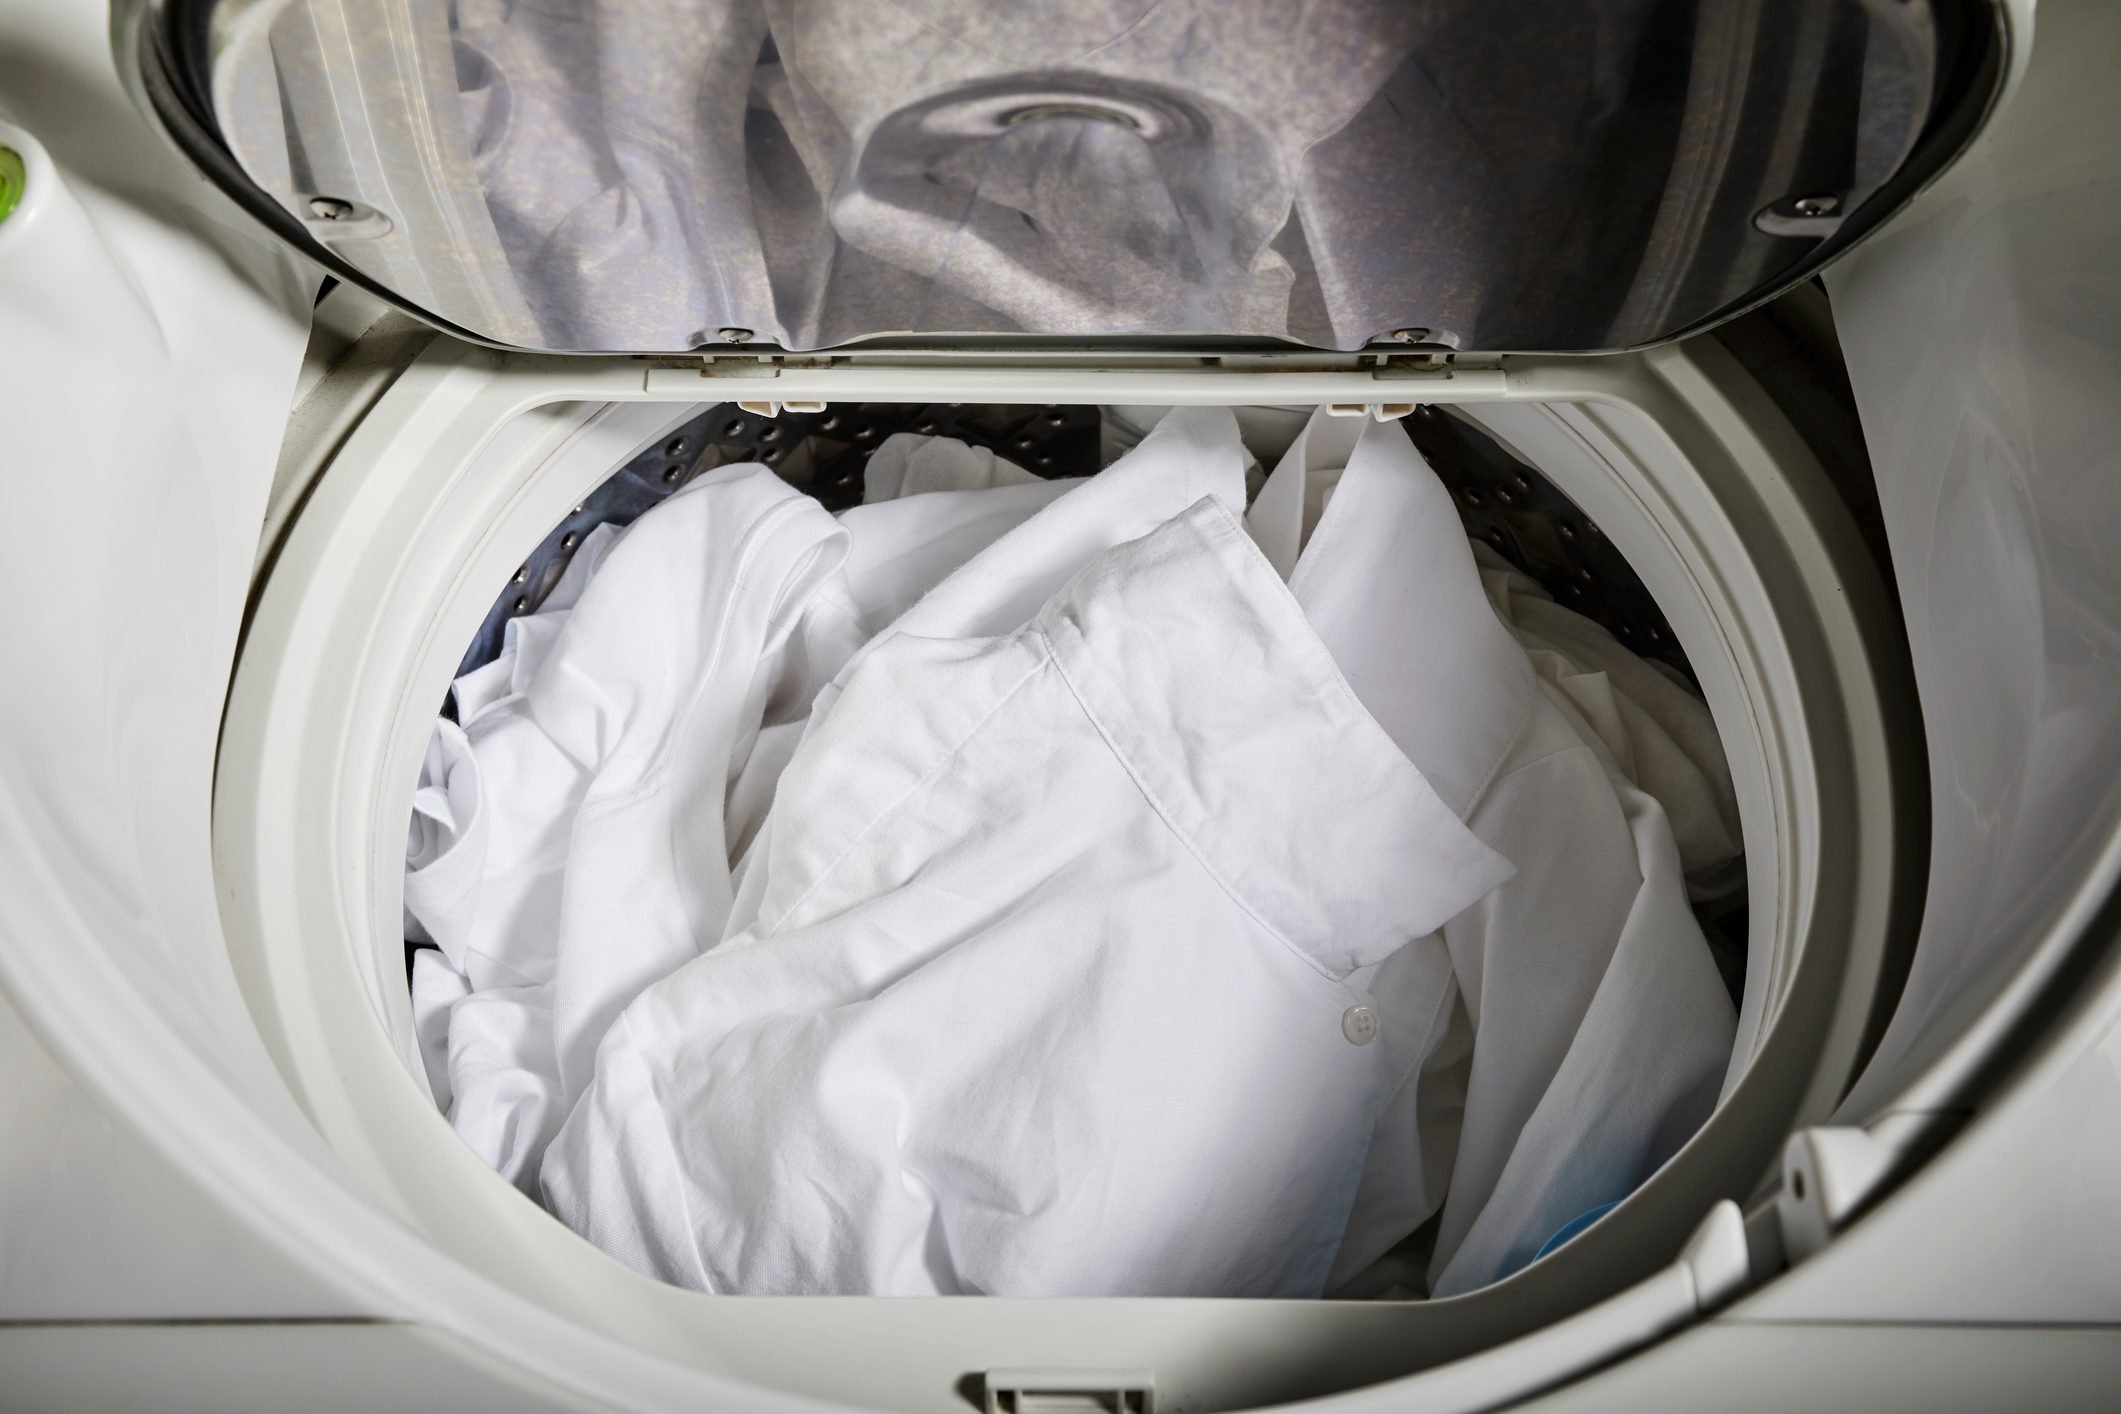 How to Dye Clothes White: 2 Easy Ways to Remove Color